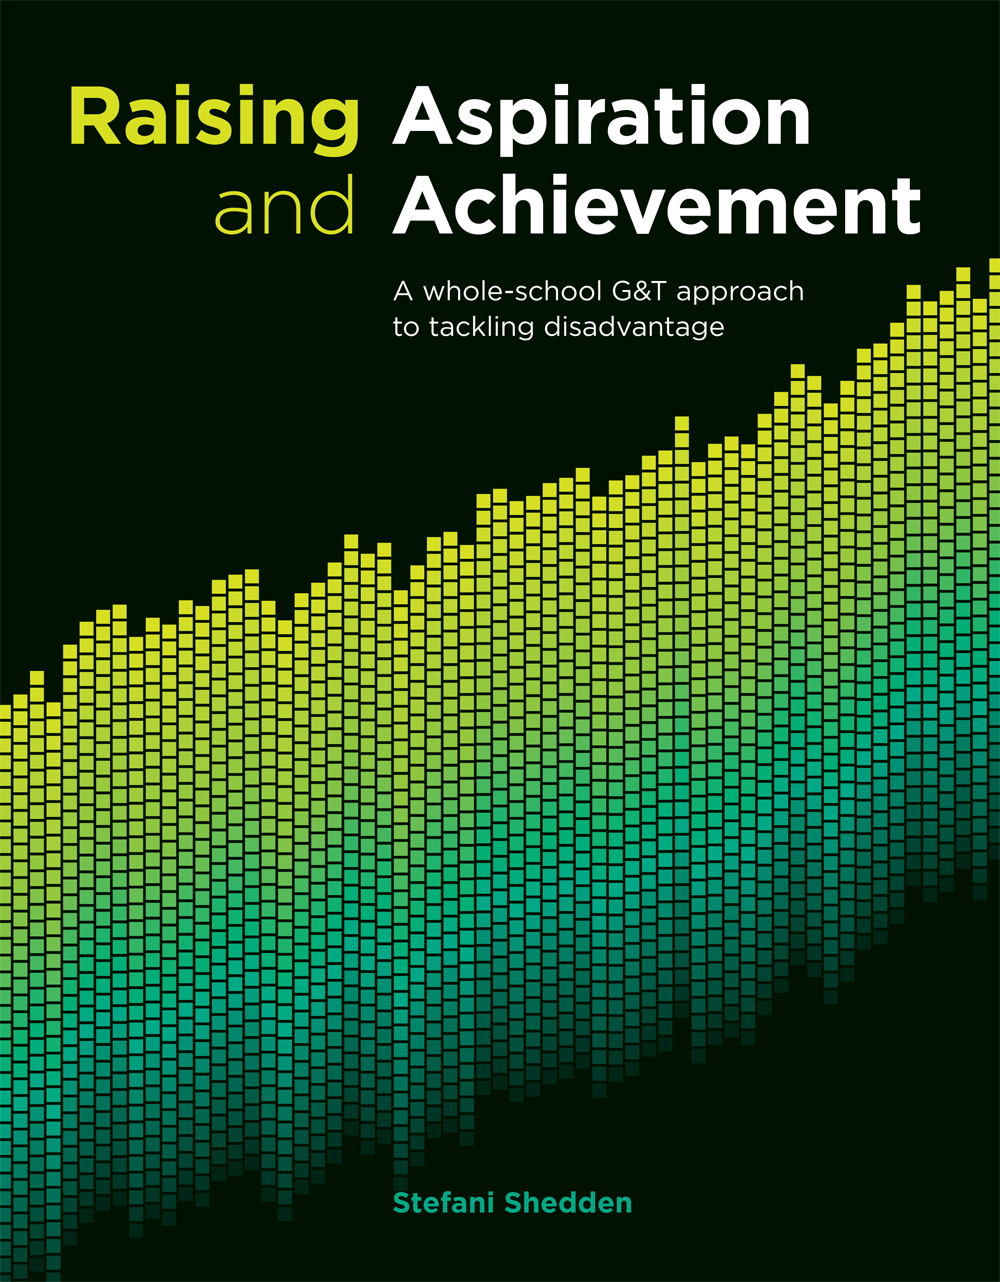 Raising Aspiration and Achievement: A whole-school G&T approach to tackling disadvantage